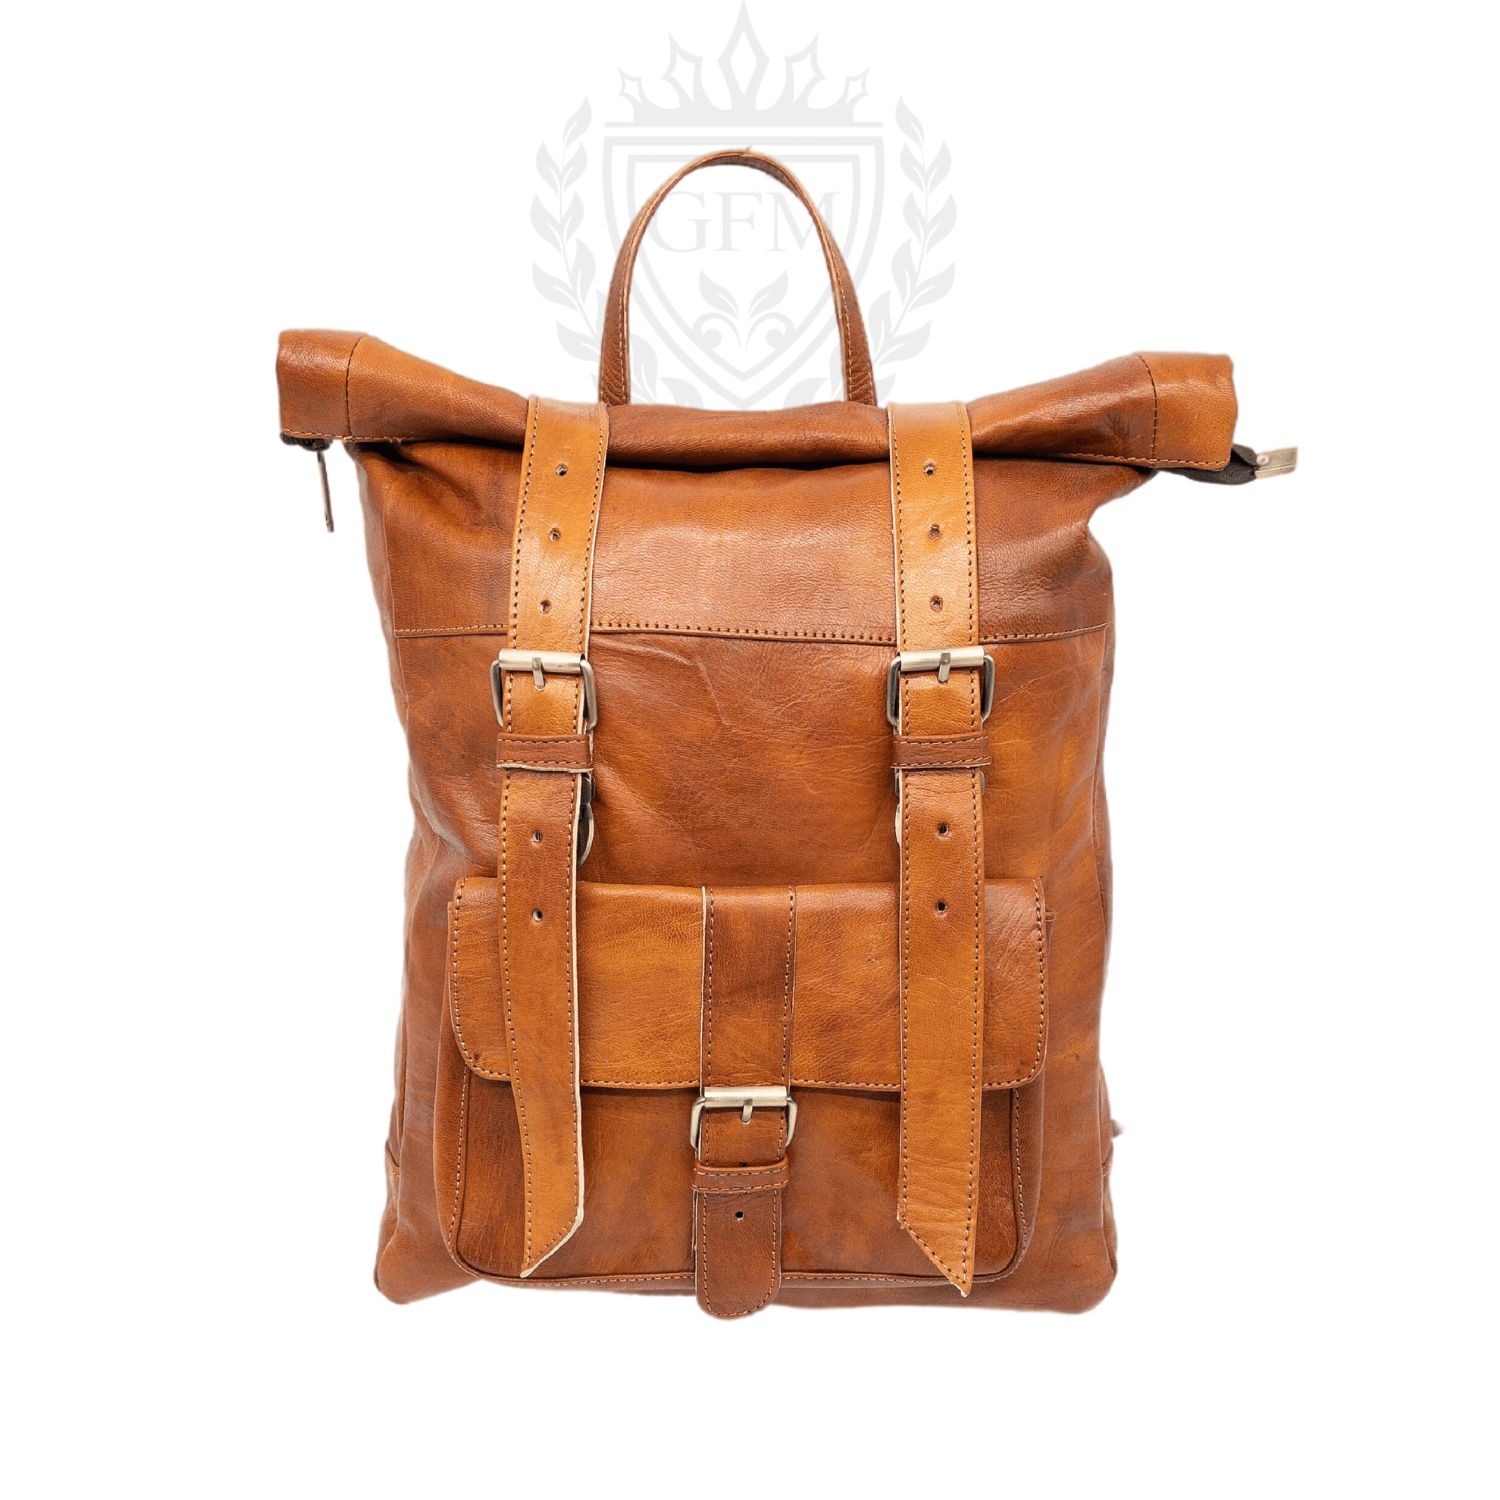 Moroccan Leather Rolltop Backpack - Unisex Hipster Bag - Stylish and Functiona